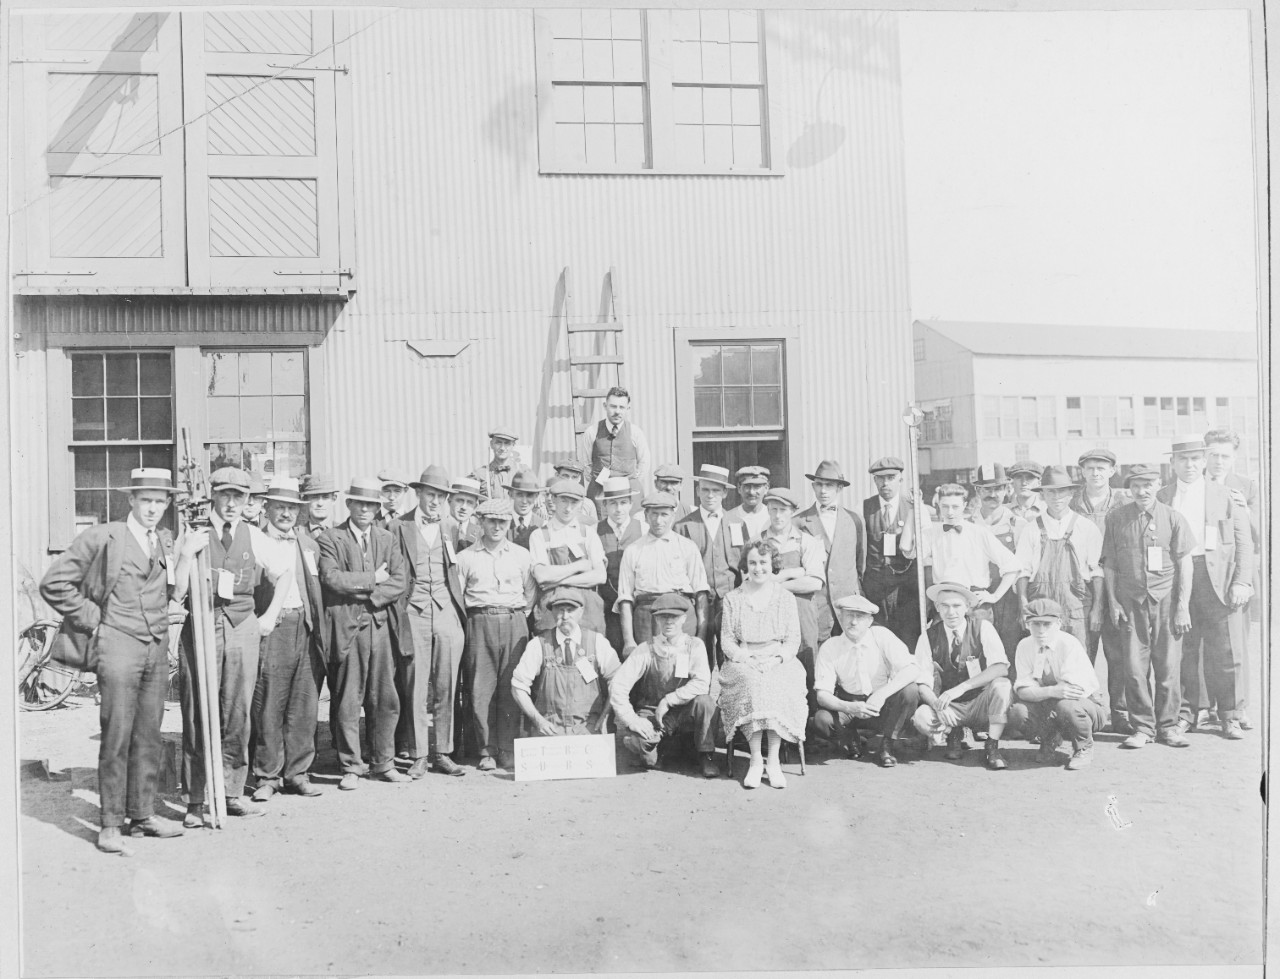 Group of Employees, including one woman, seated. Lake Torpedo Boat Company, Bridgeport, Connecticut